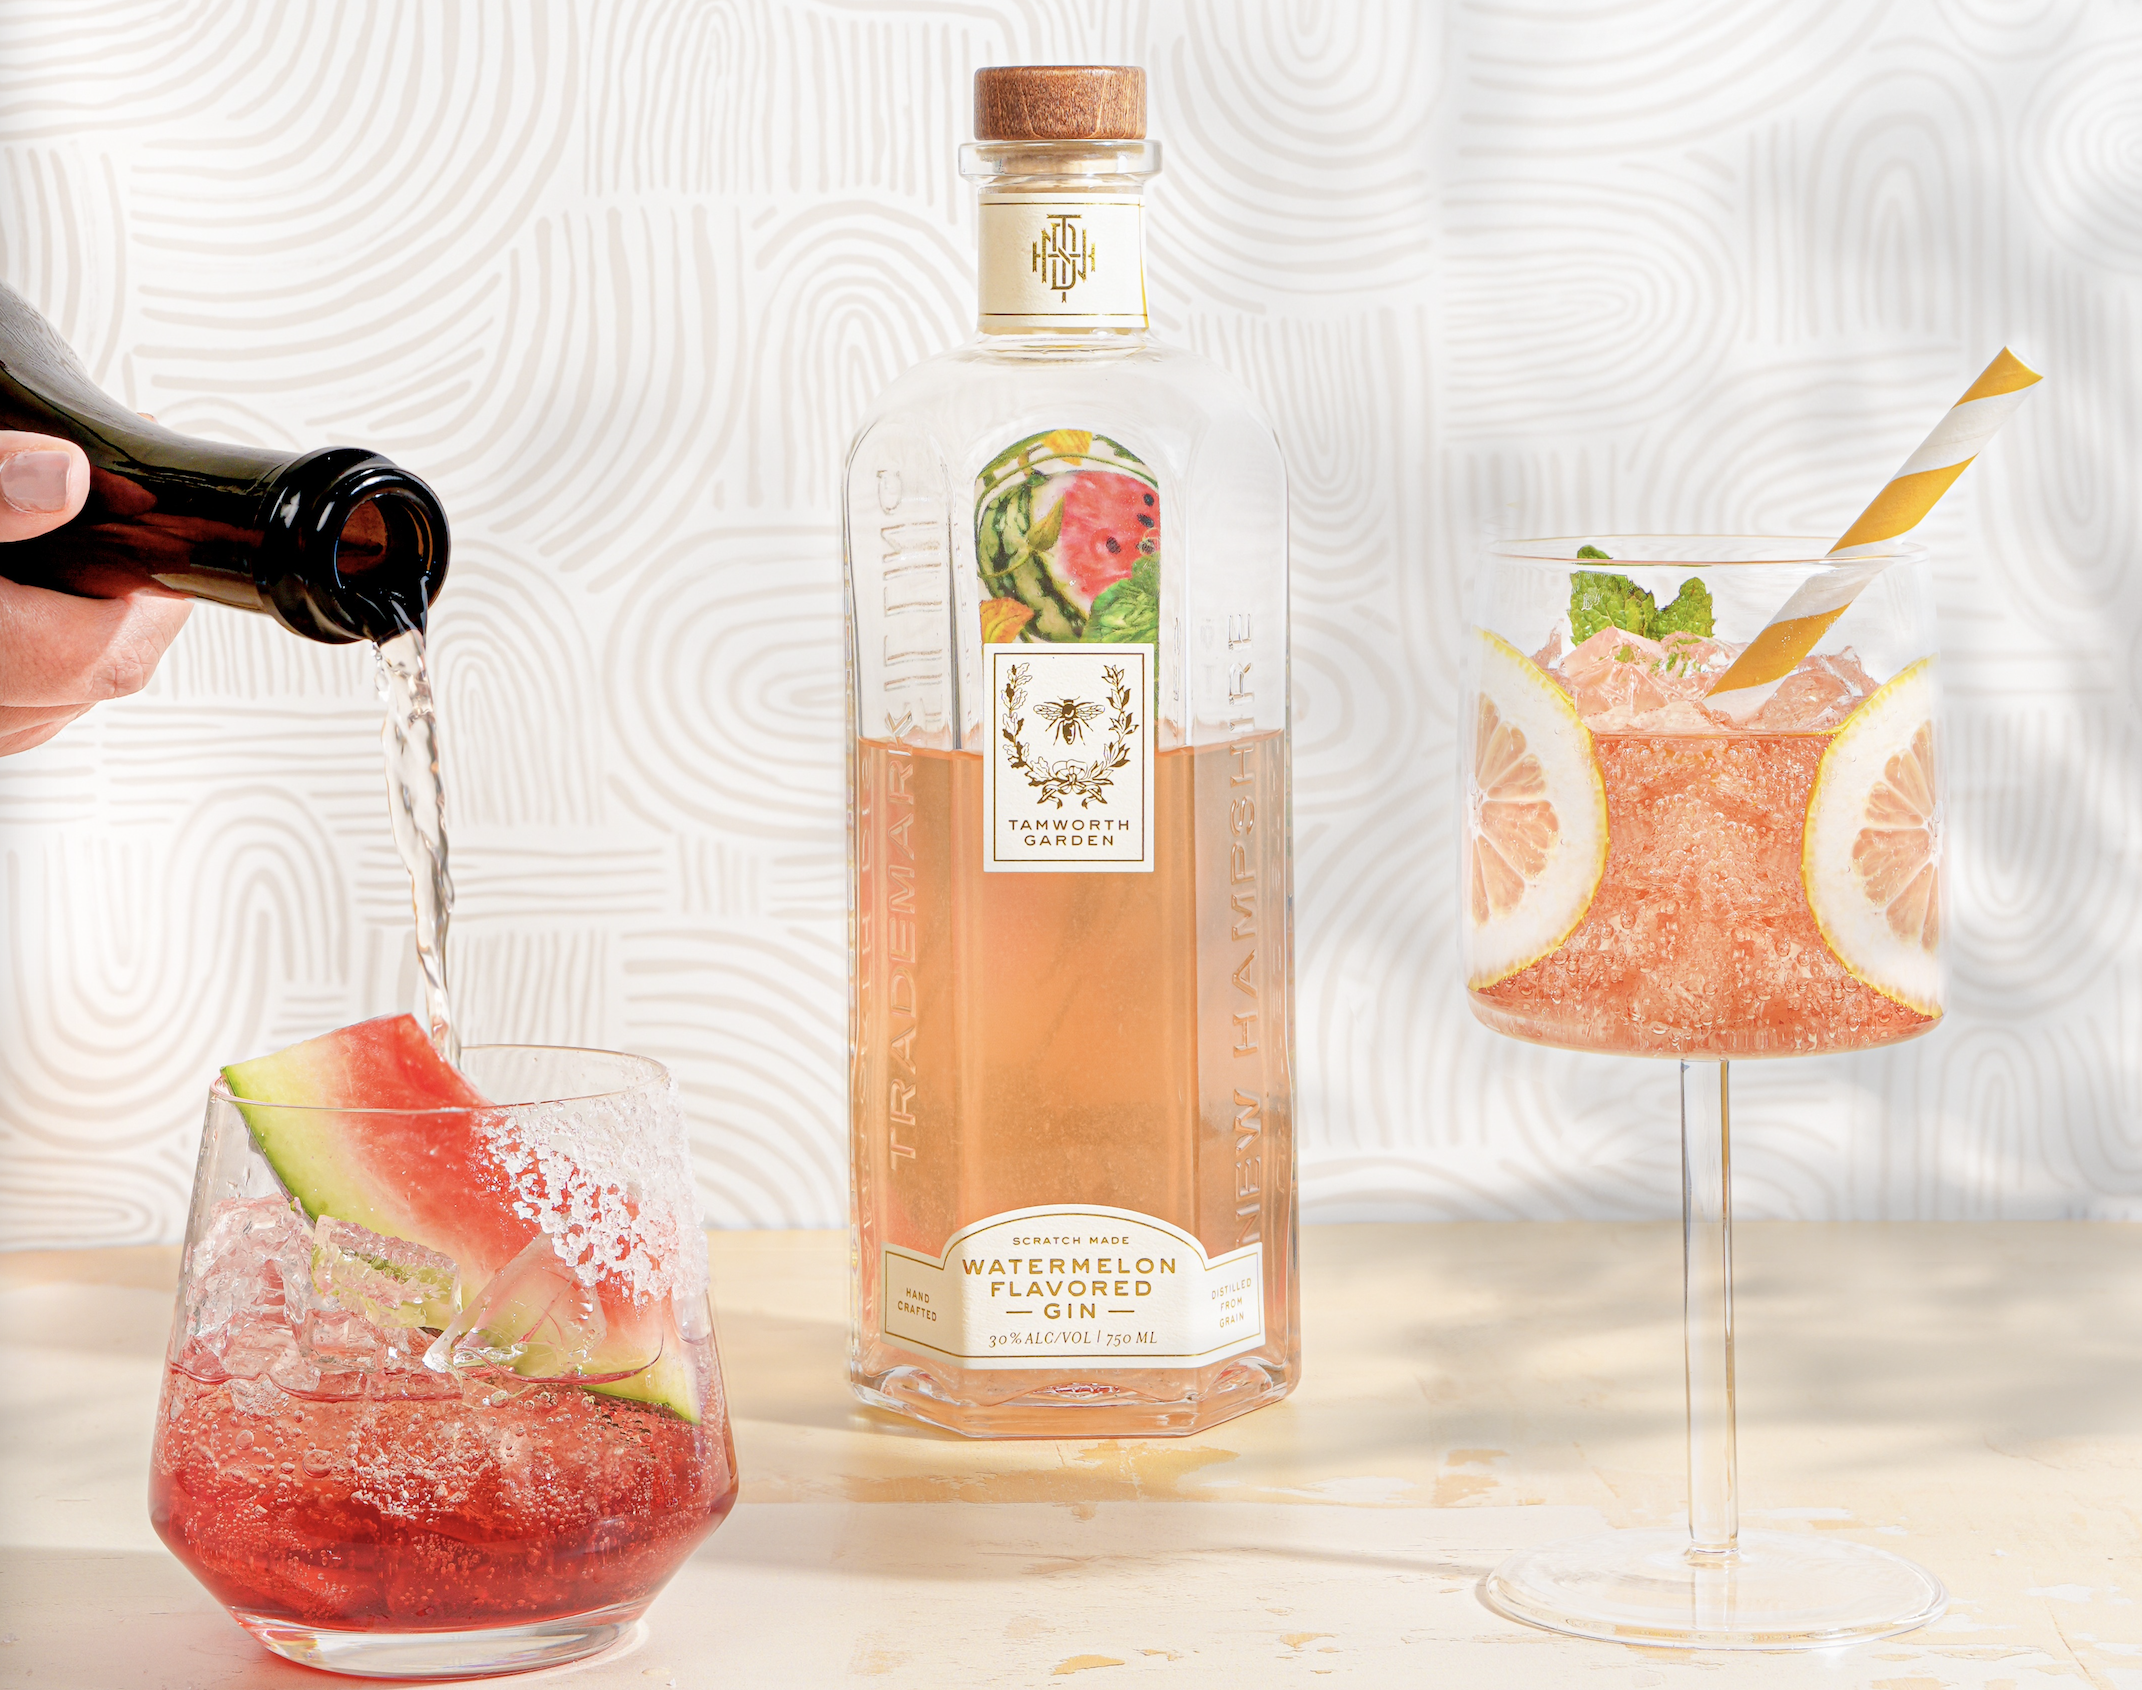 A Slice Of Summer: The Return of Tamworth Distilling’s Naturally Flavored Watermelon Gin